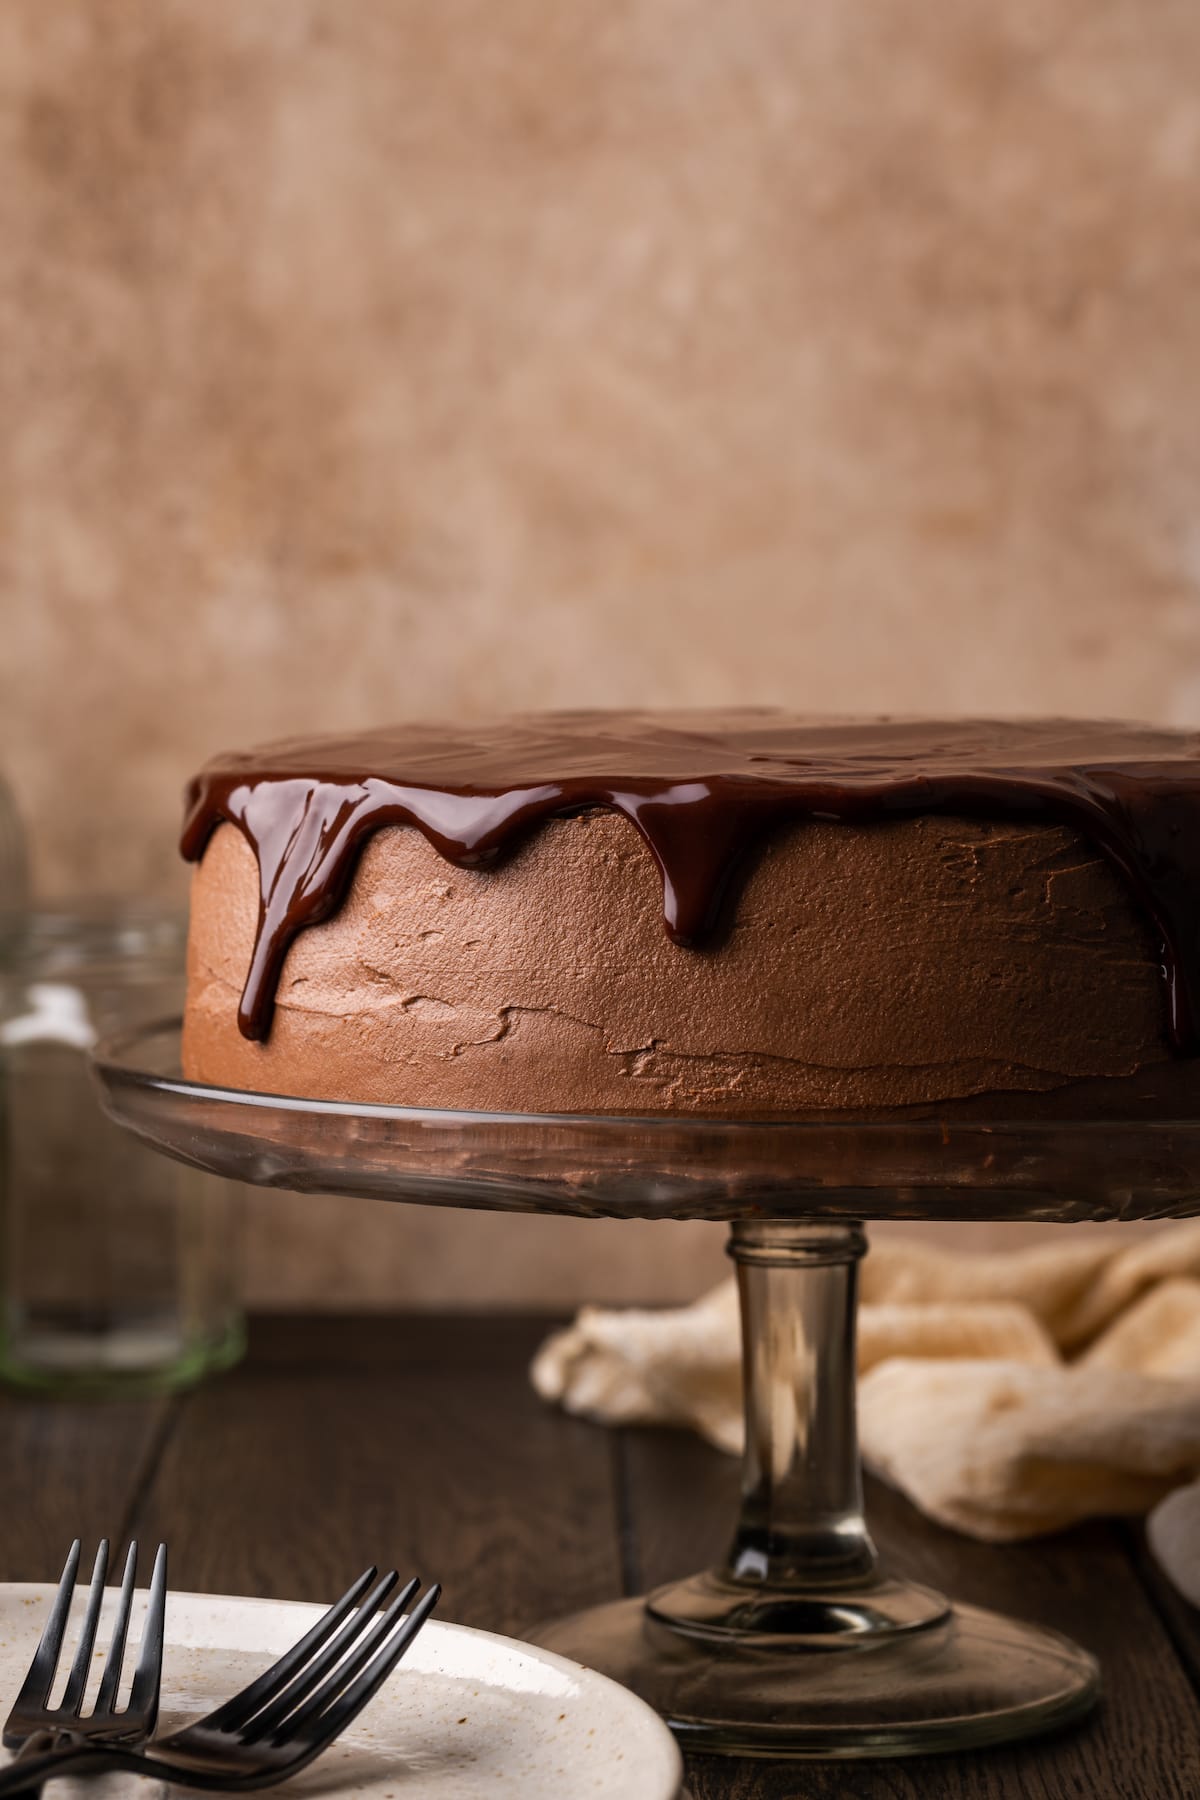 A frosted chocolate layer cake topped with chocolate ganache on a cake stand, next to a white plate with two forks.